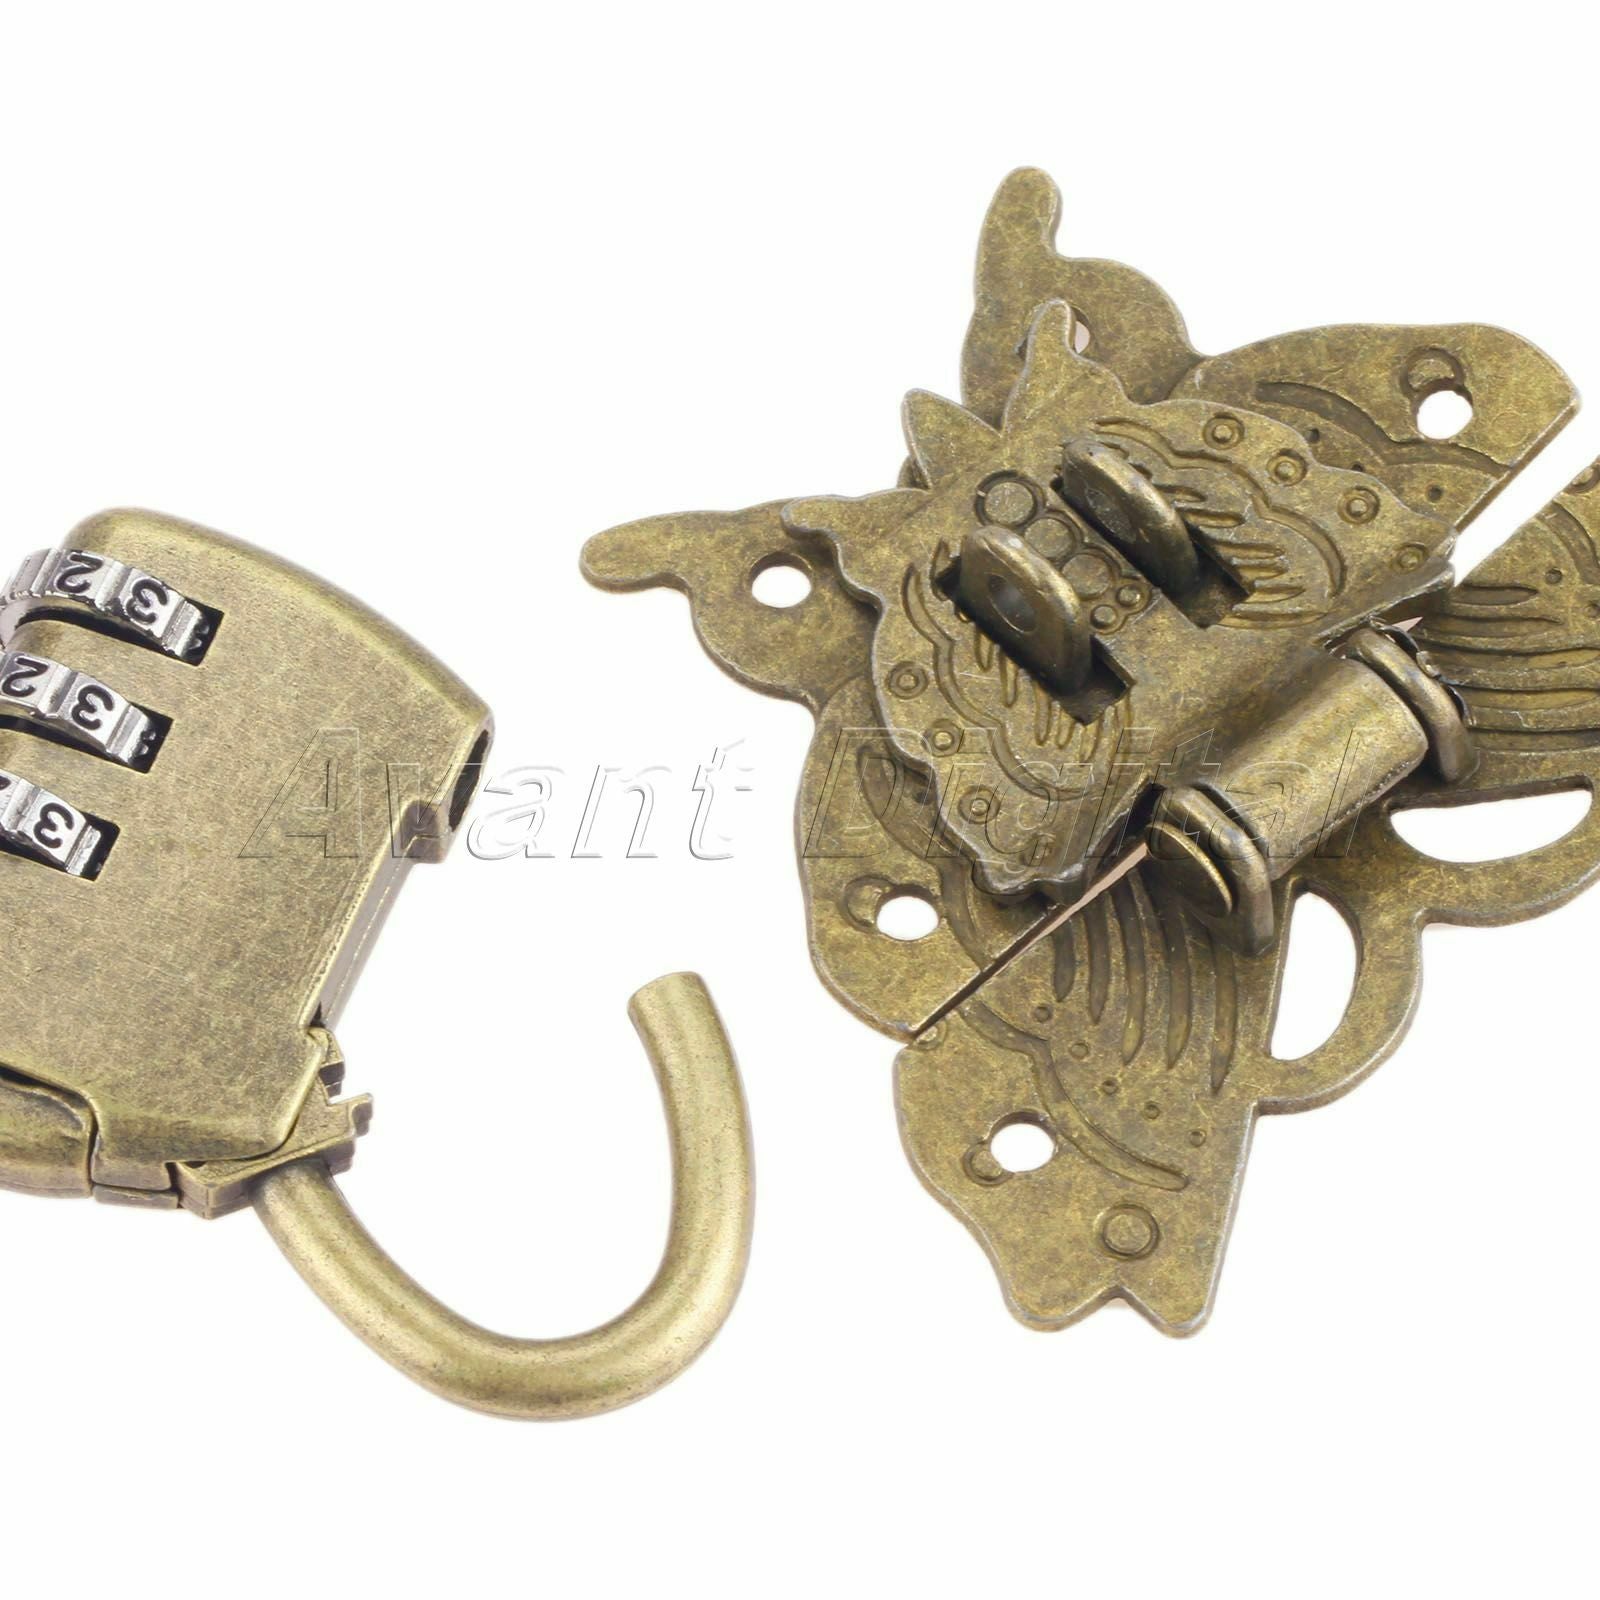 Retro Style Chinese Password Padlock Lock Key with Butterfly Box Latch Clasp Set